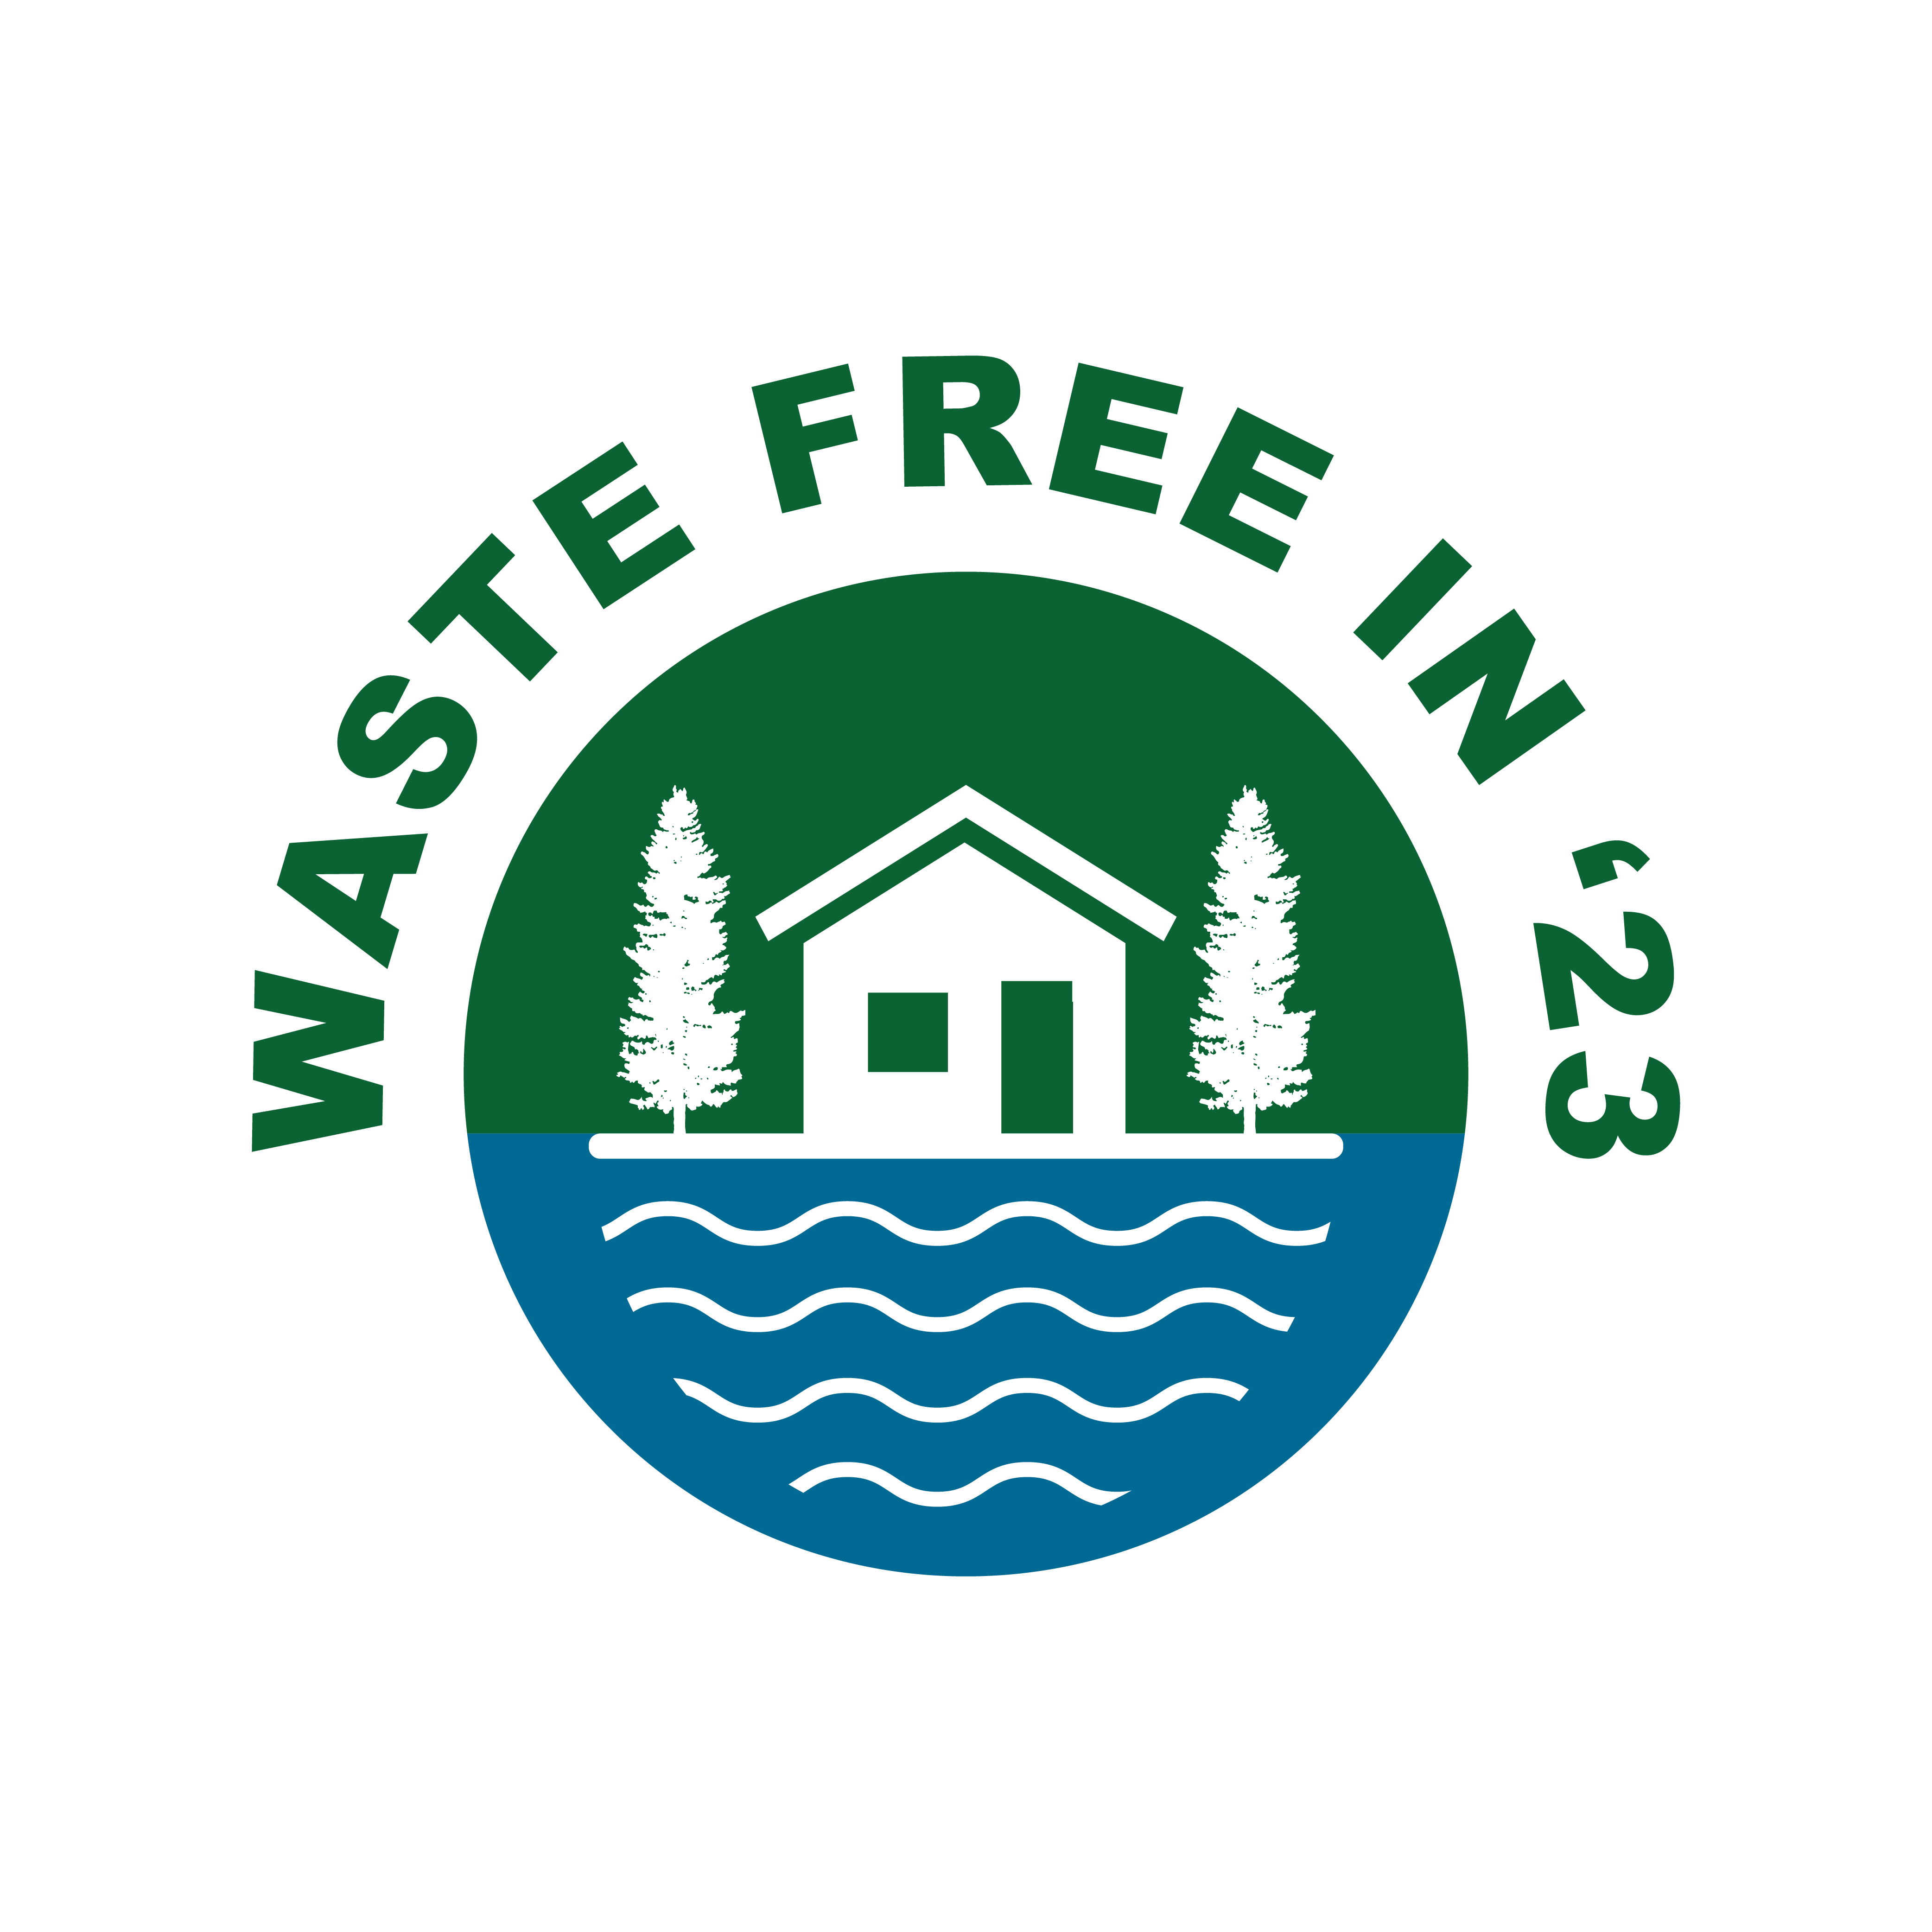 Copy of waste free in 23 logo.png